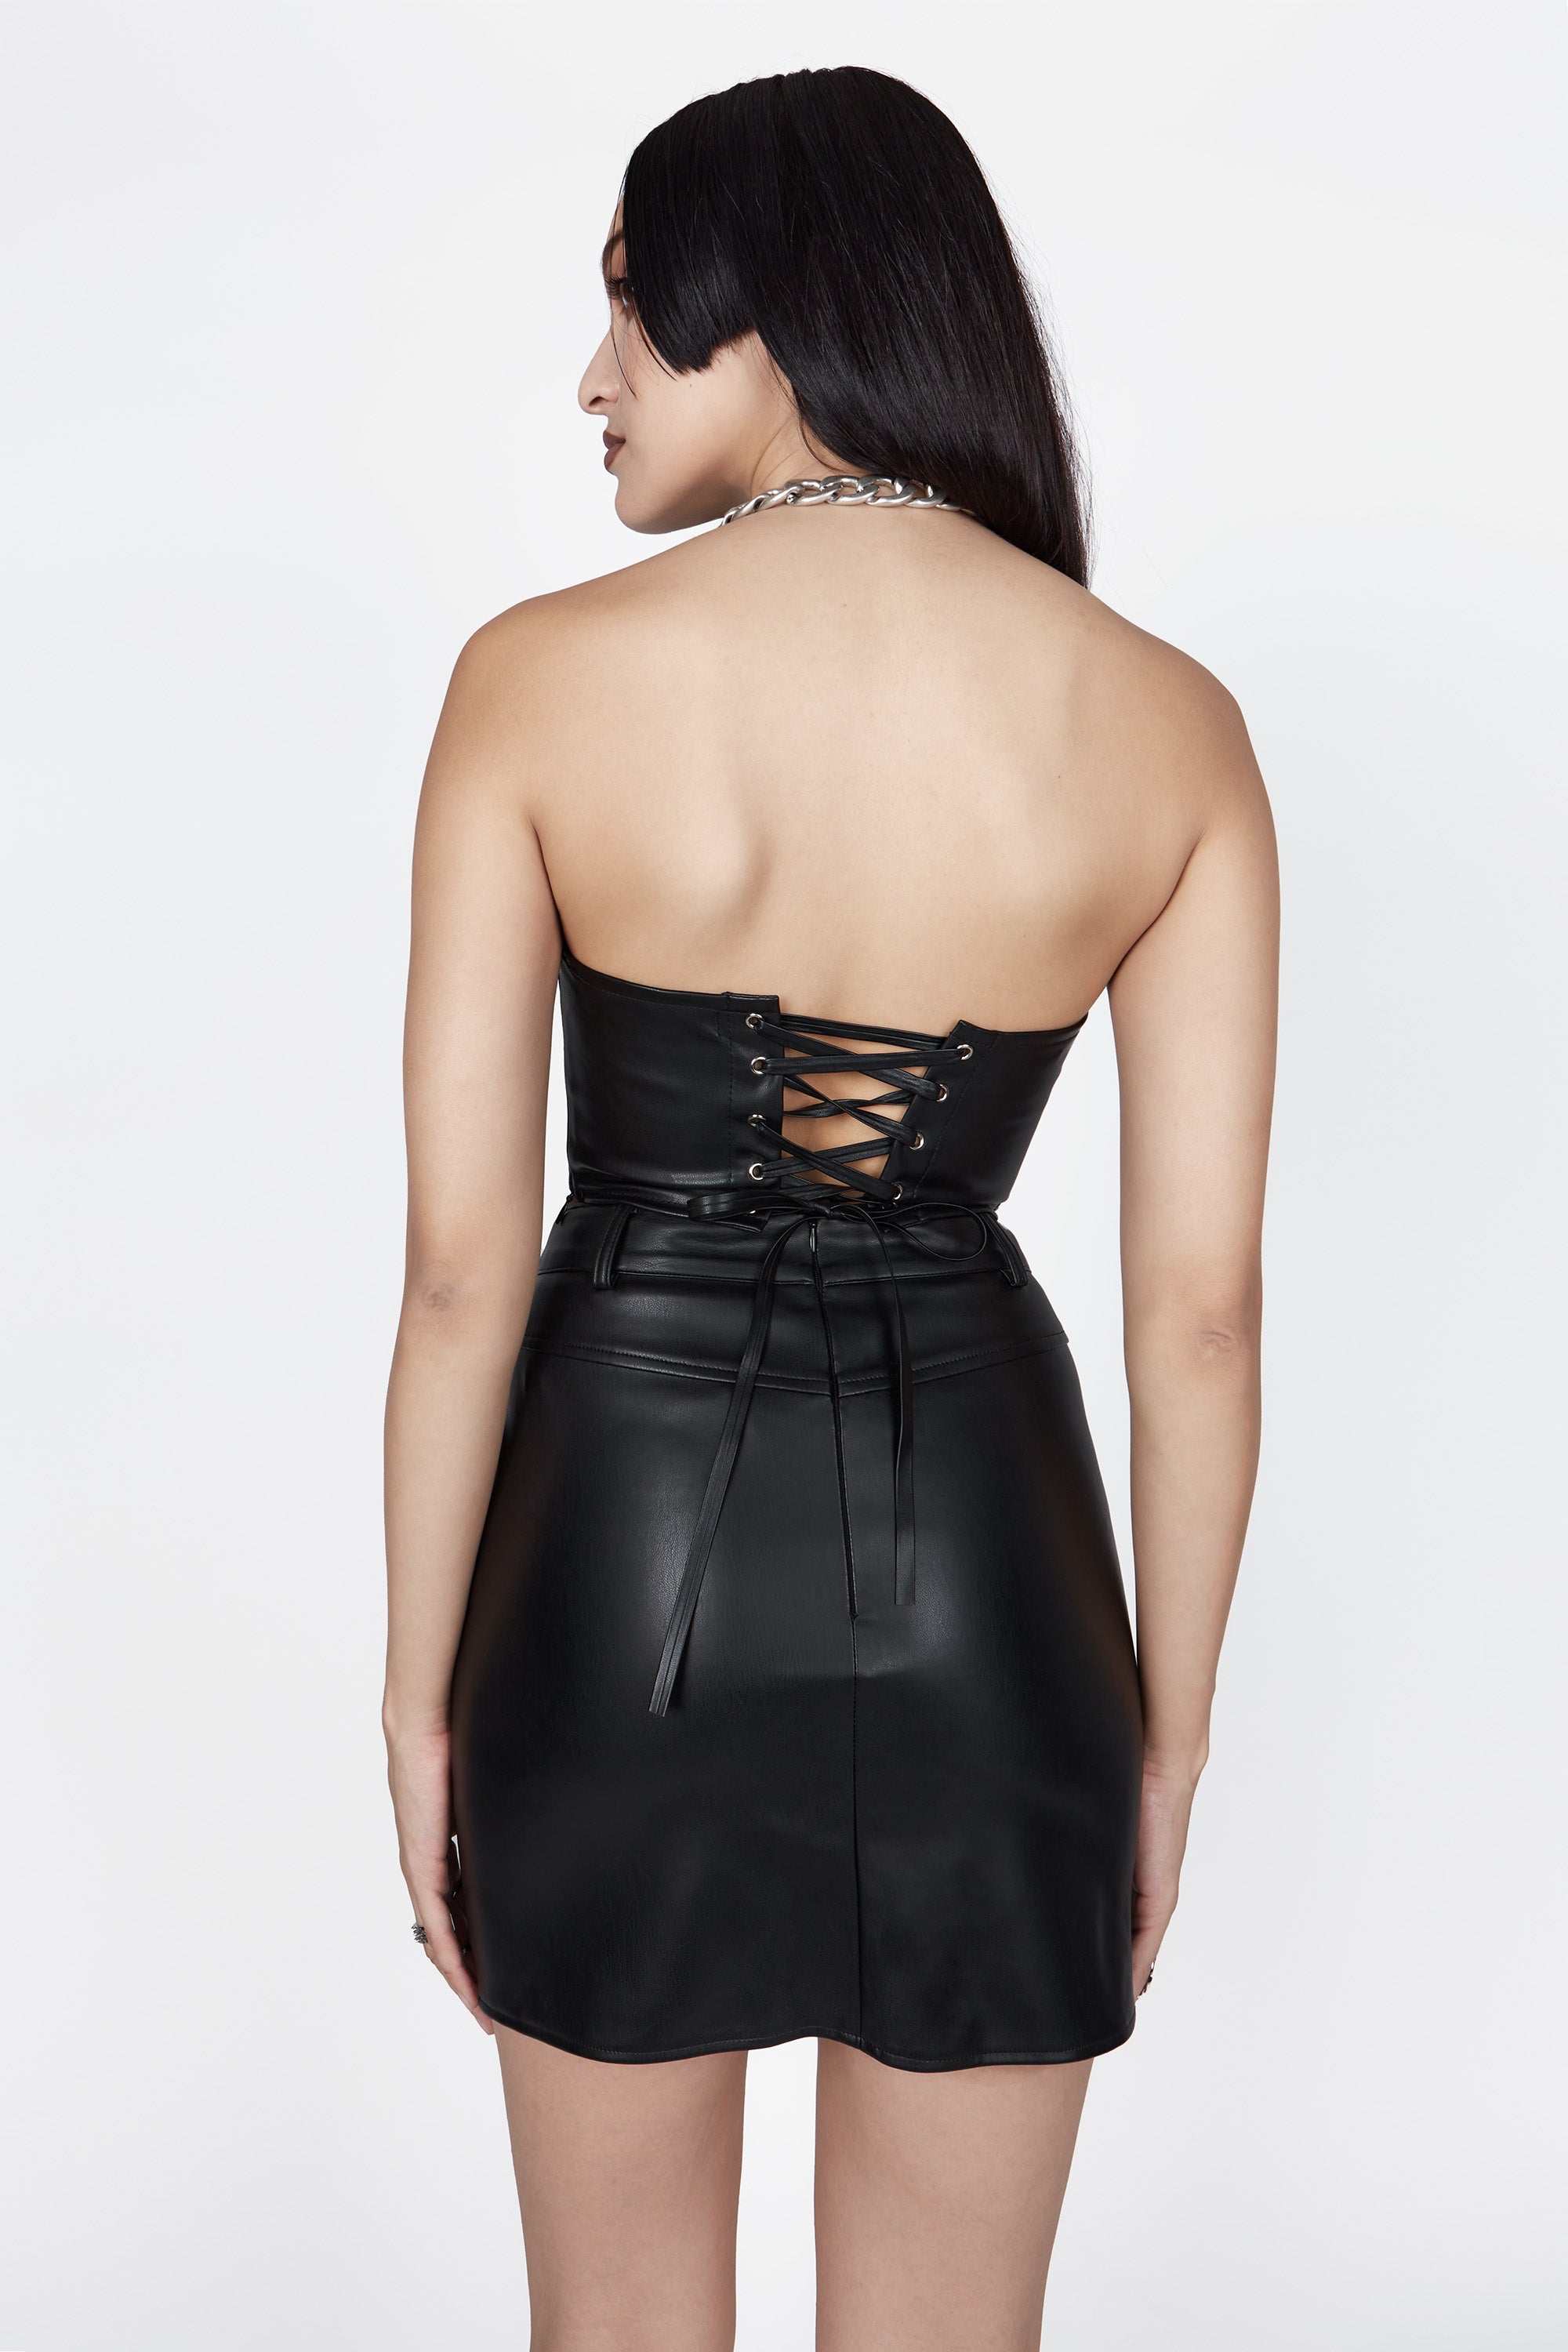 Selene Faux Leather Lace-Up Corset Top - Mary Wyatt London